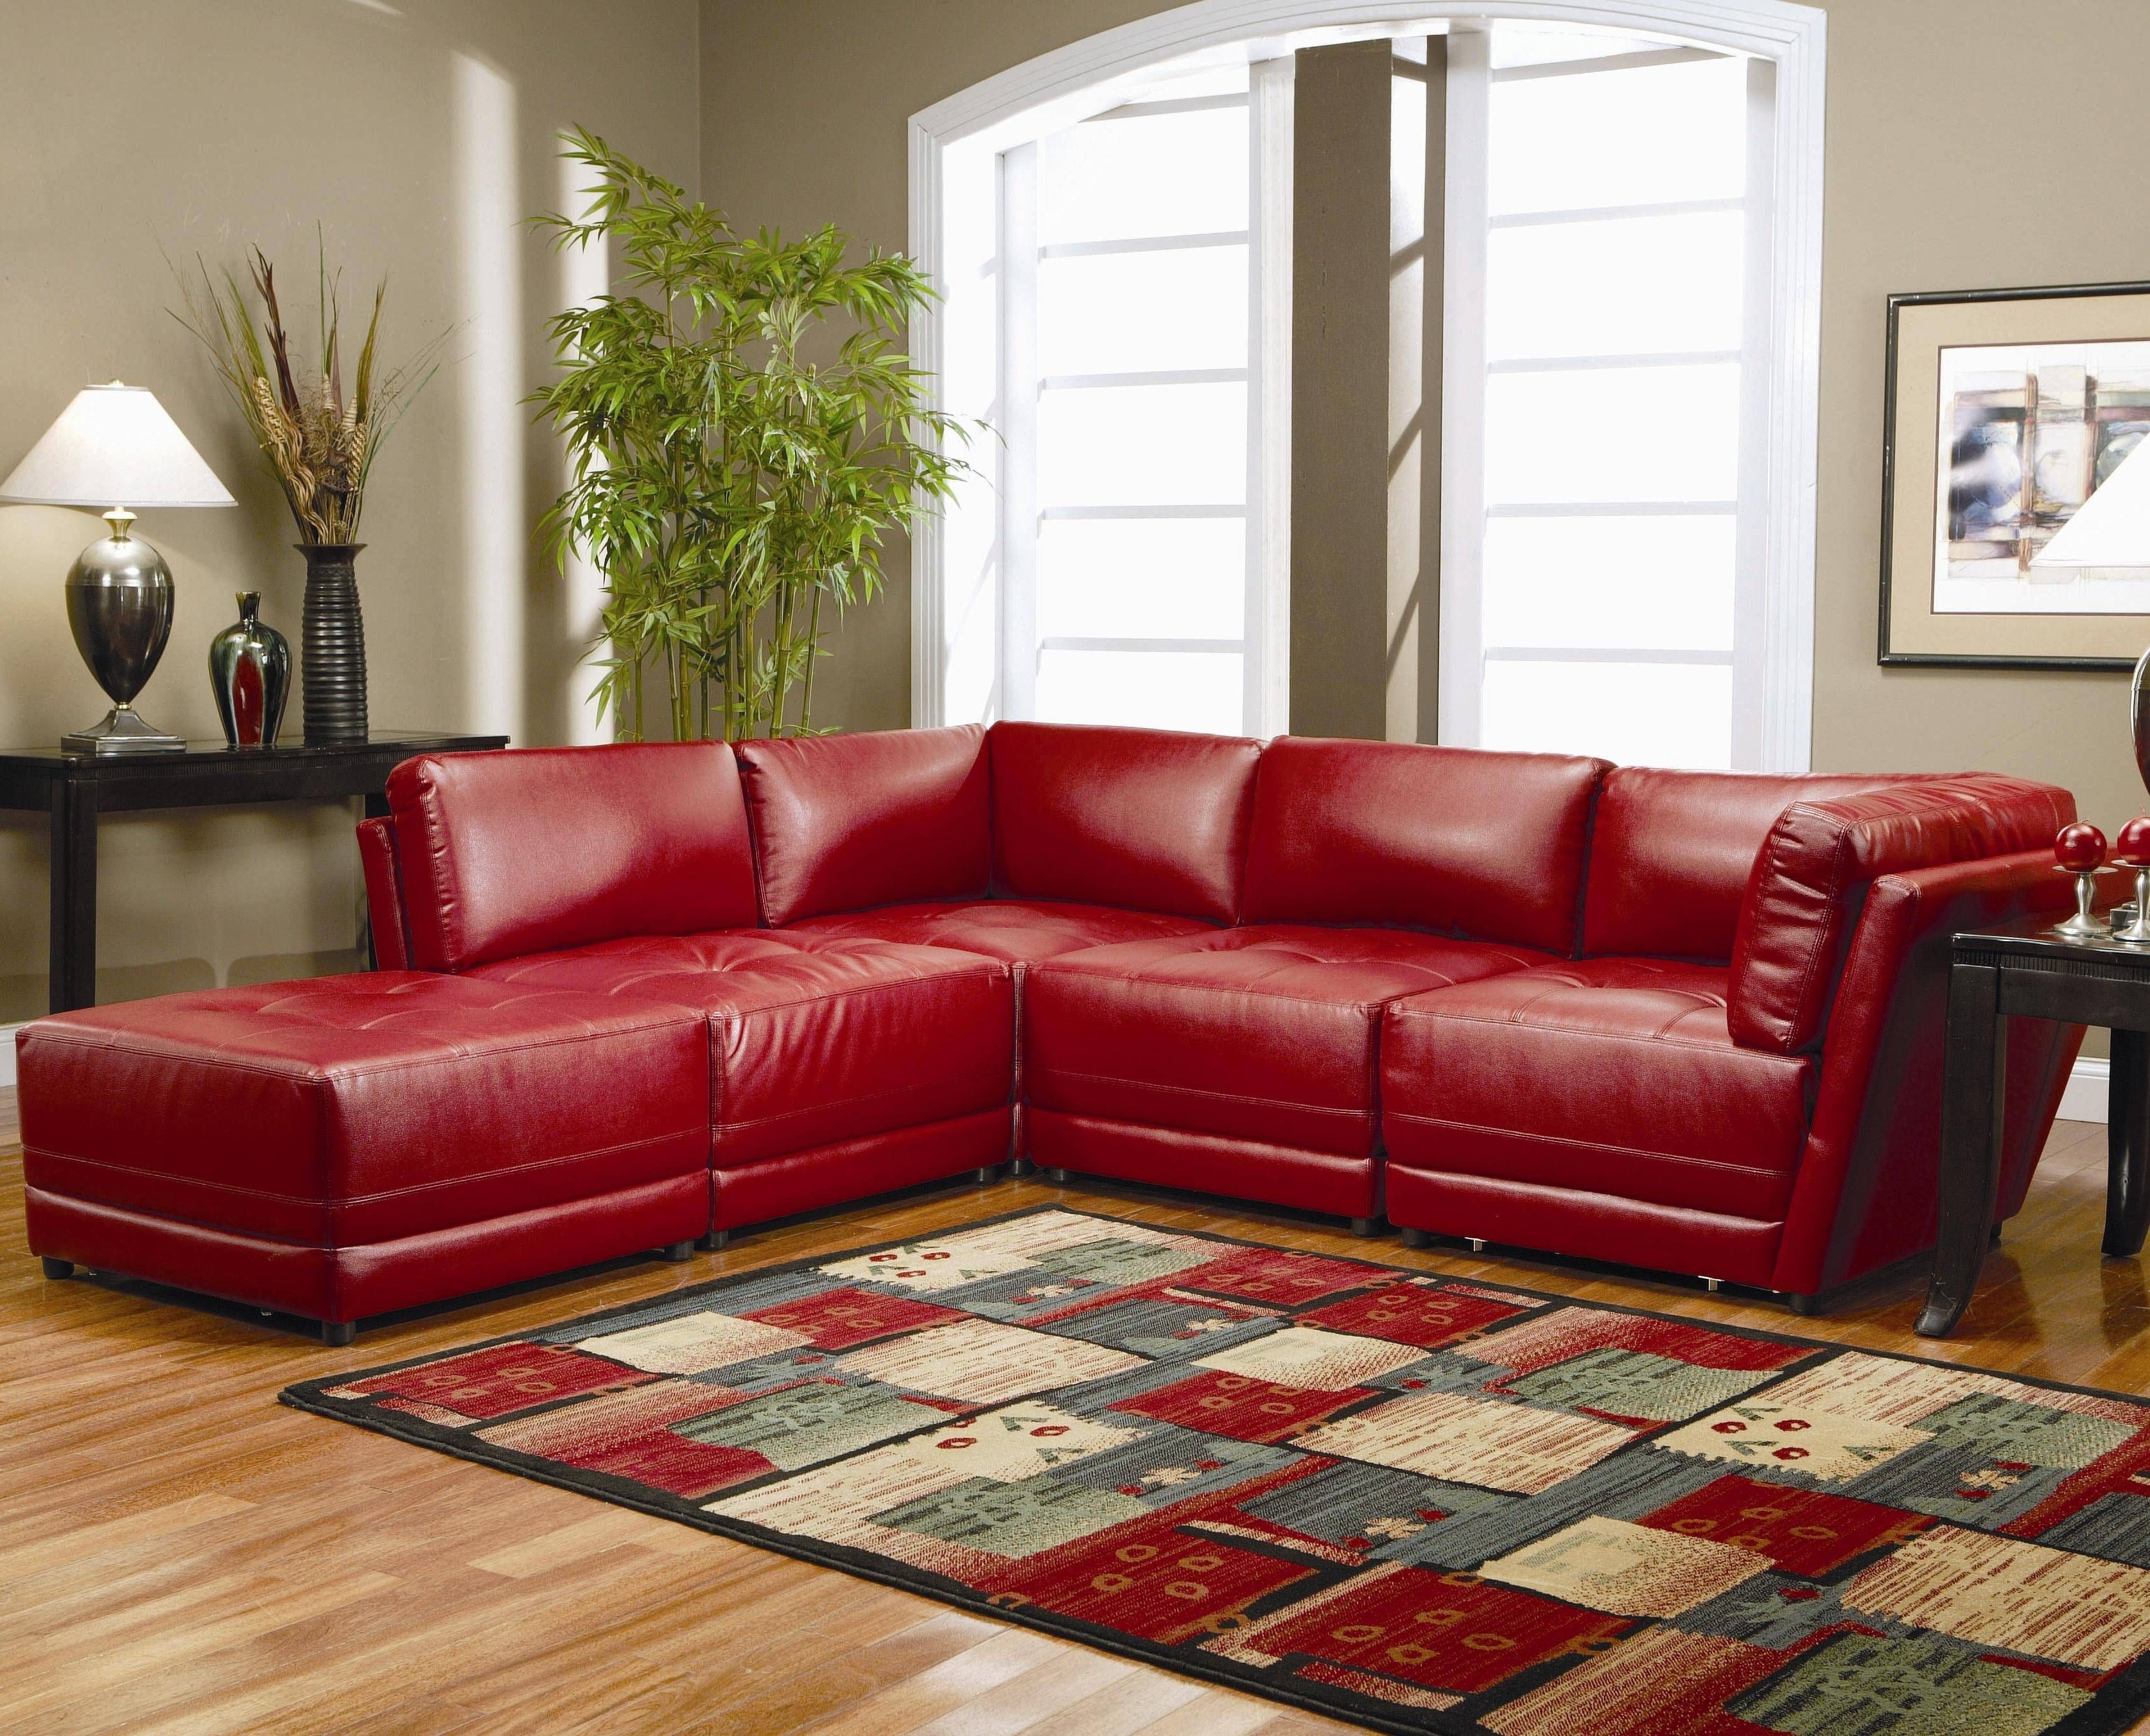 Excellent Design Red Living Room Set Stunning Decoration Living Throughout Red Sofas And Chairs (View 19 of 30)